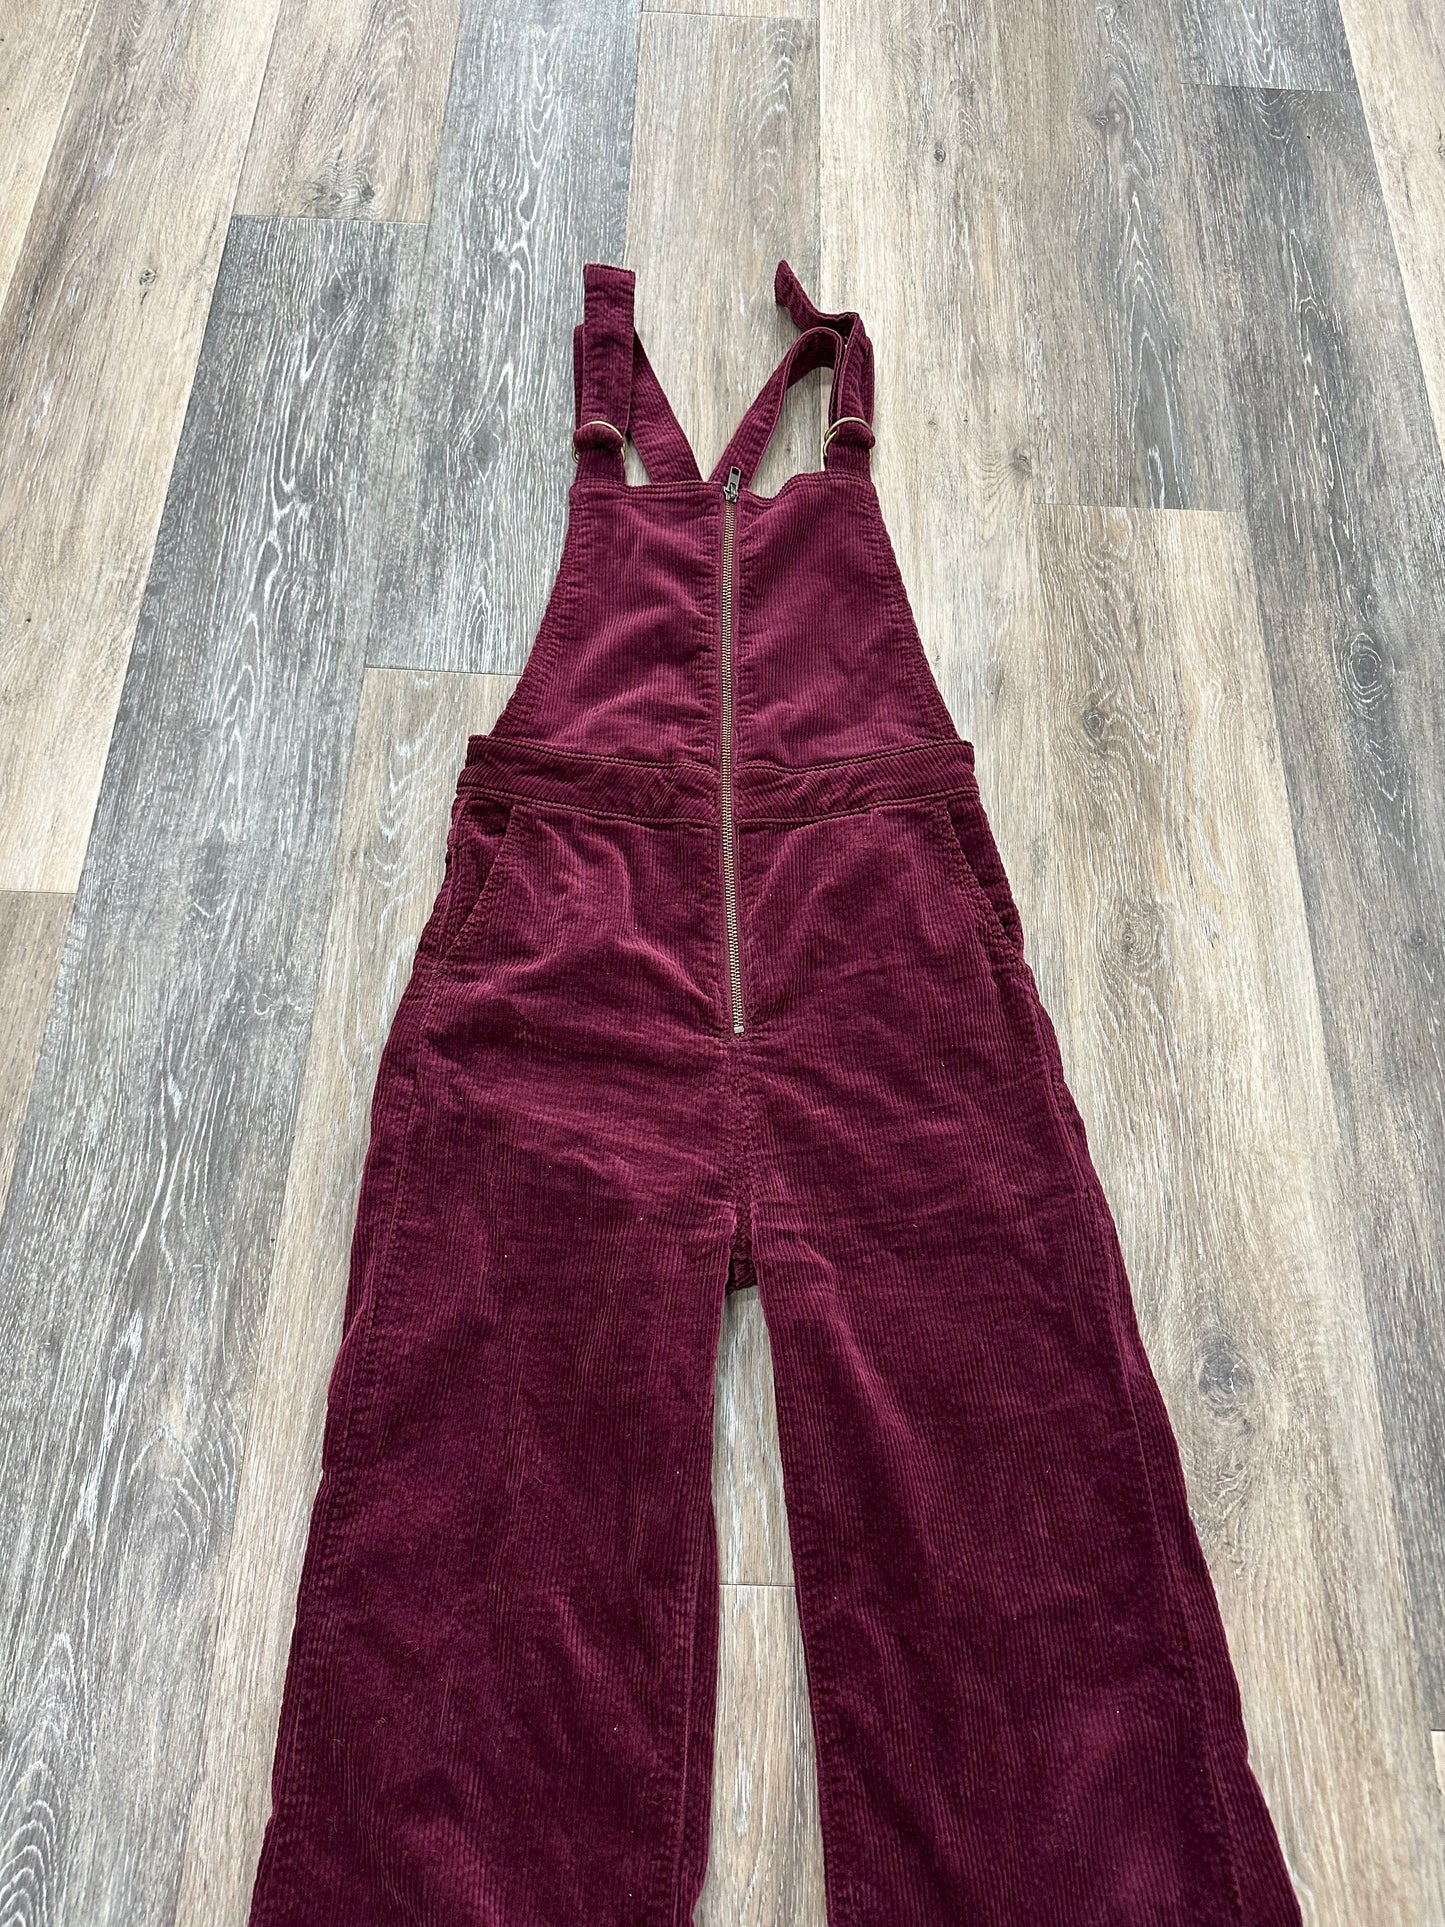 Overalls By Rollas  Size: 0